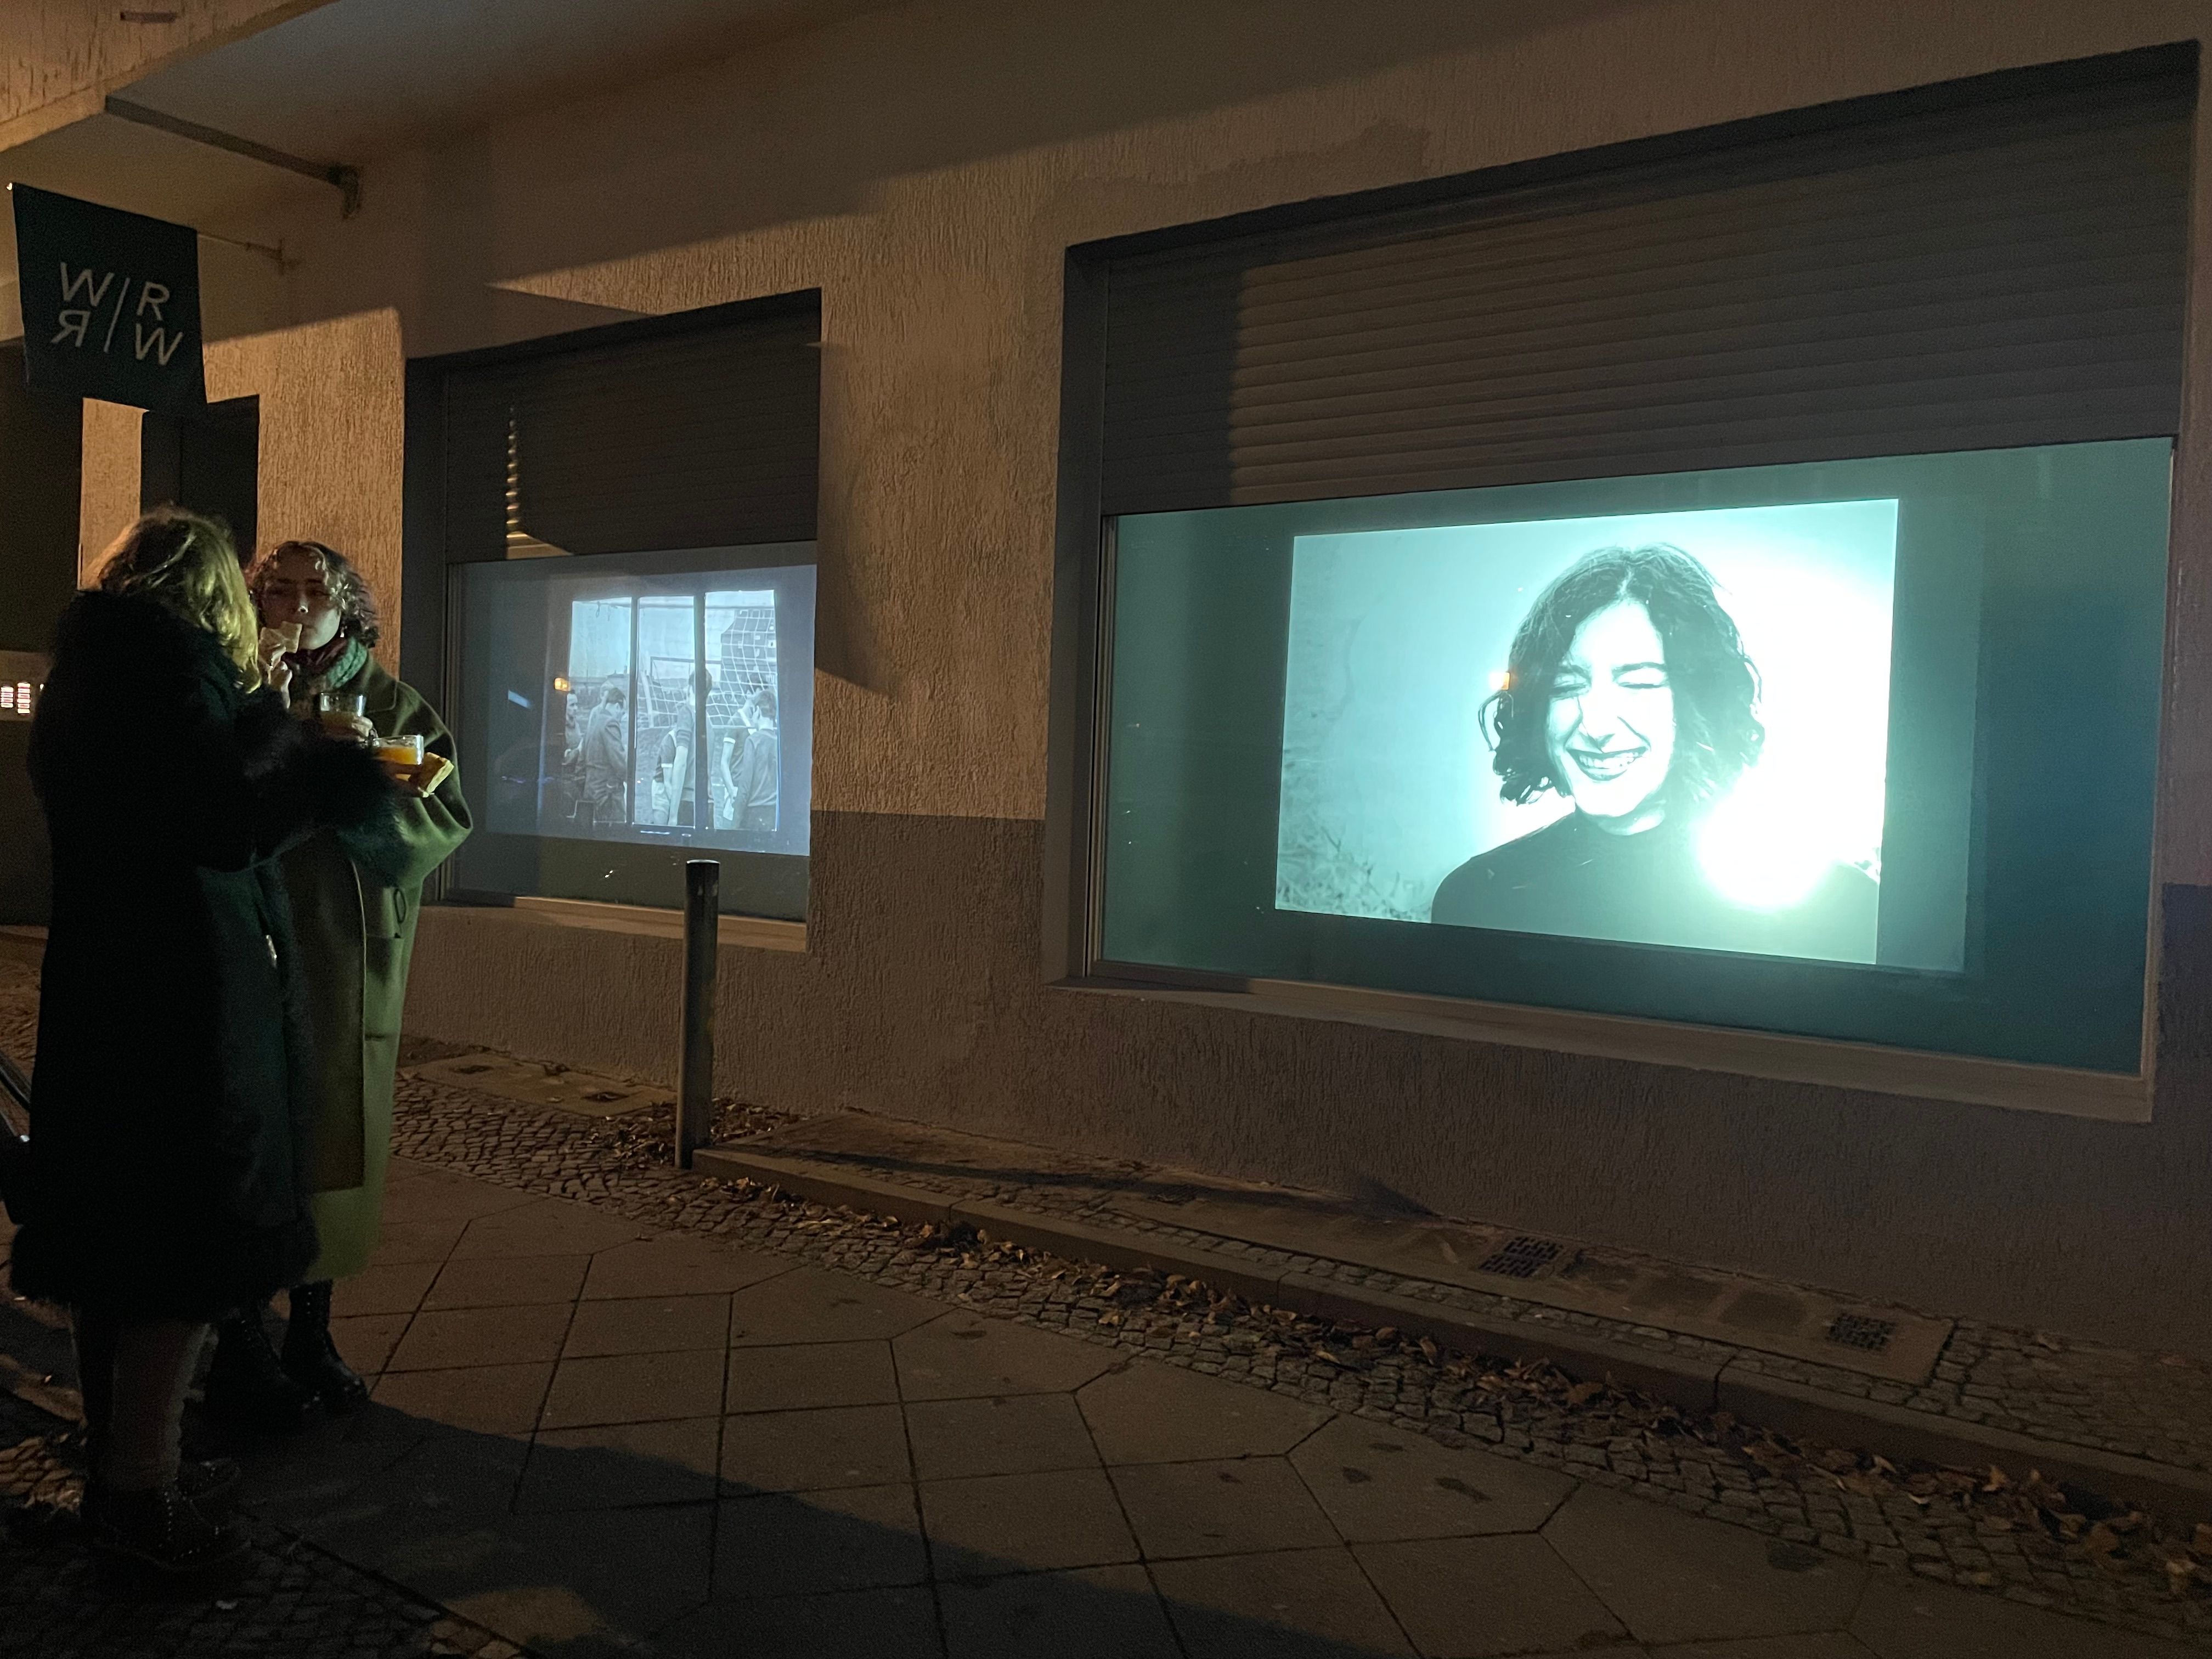 Two people stand, eating, on the curb in front of two projected photographs: a smiling portrait and people behind a window.